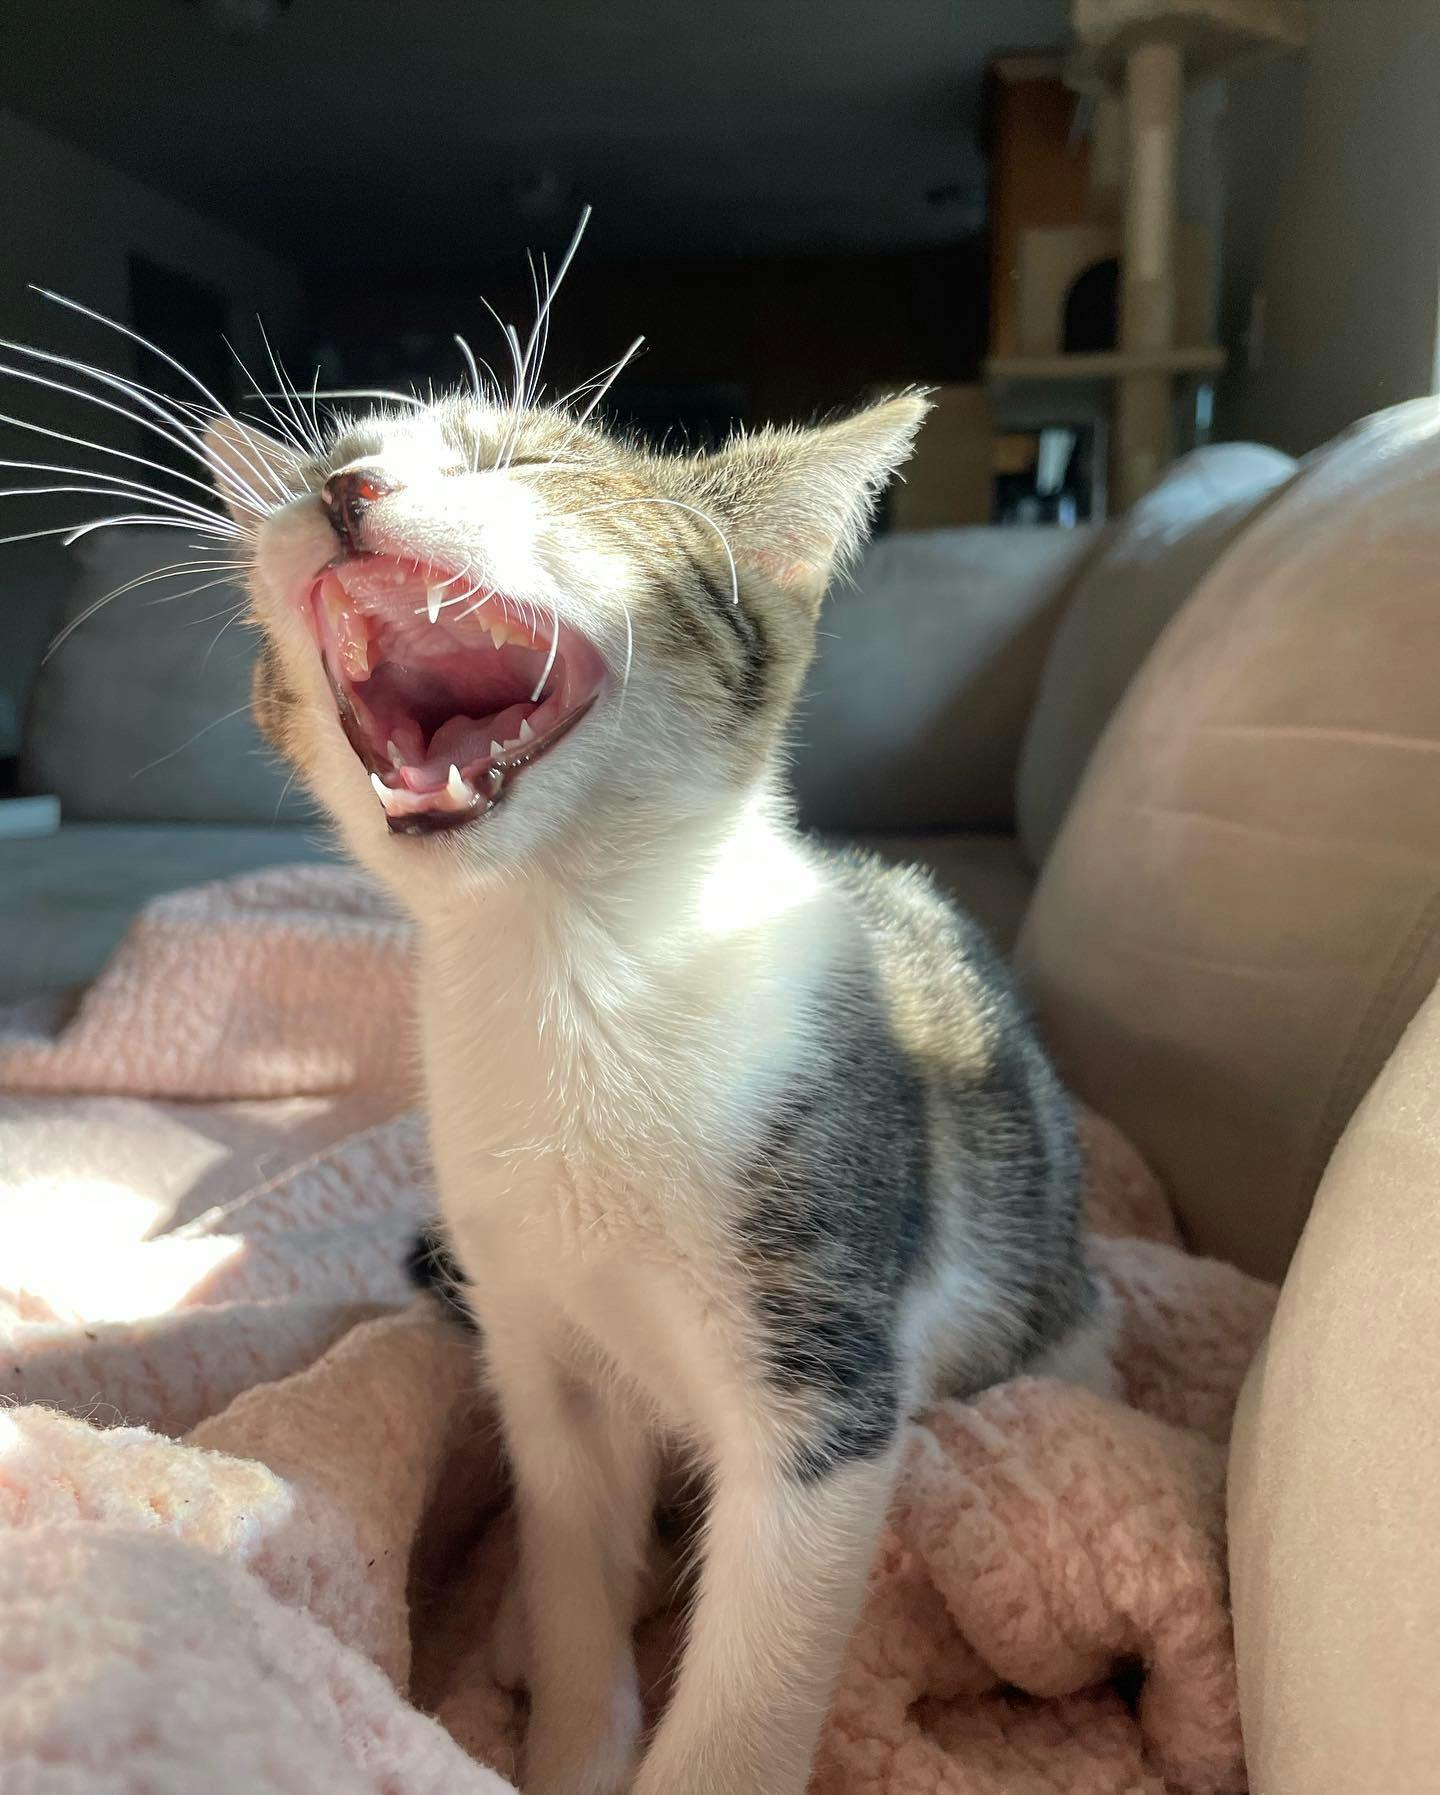 A young kitten yawns in a patch of sunlight.